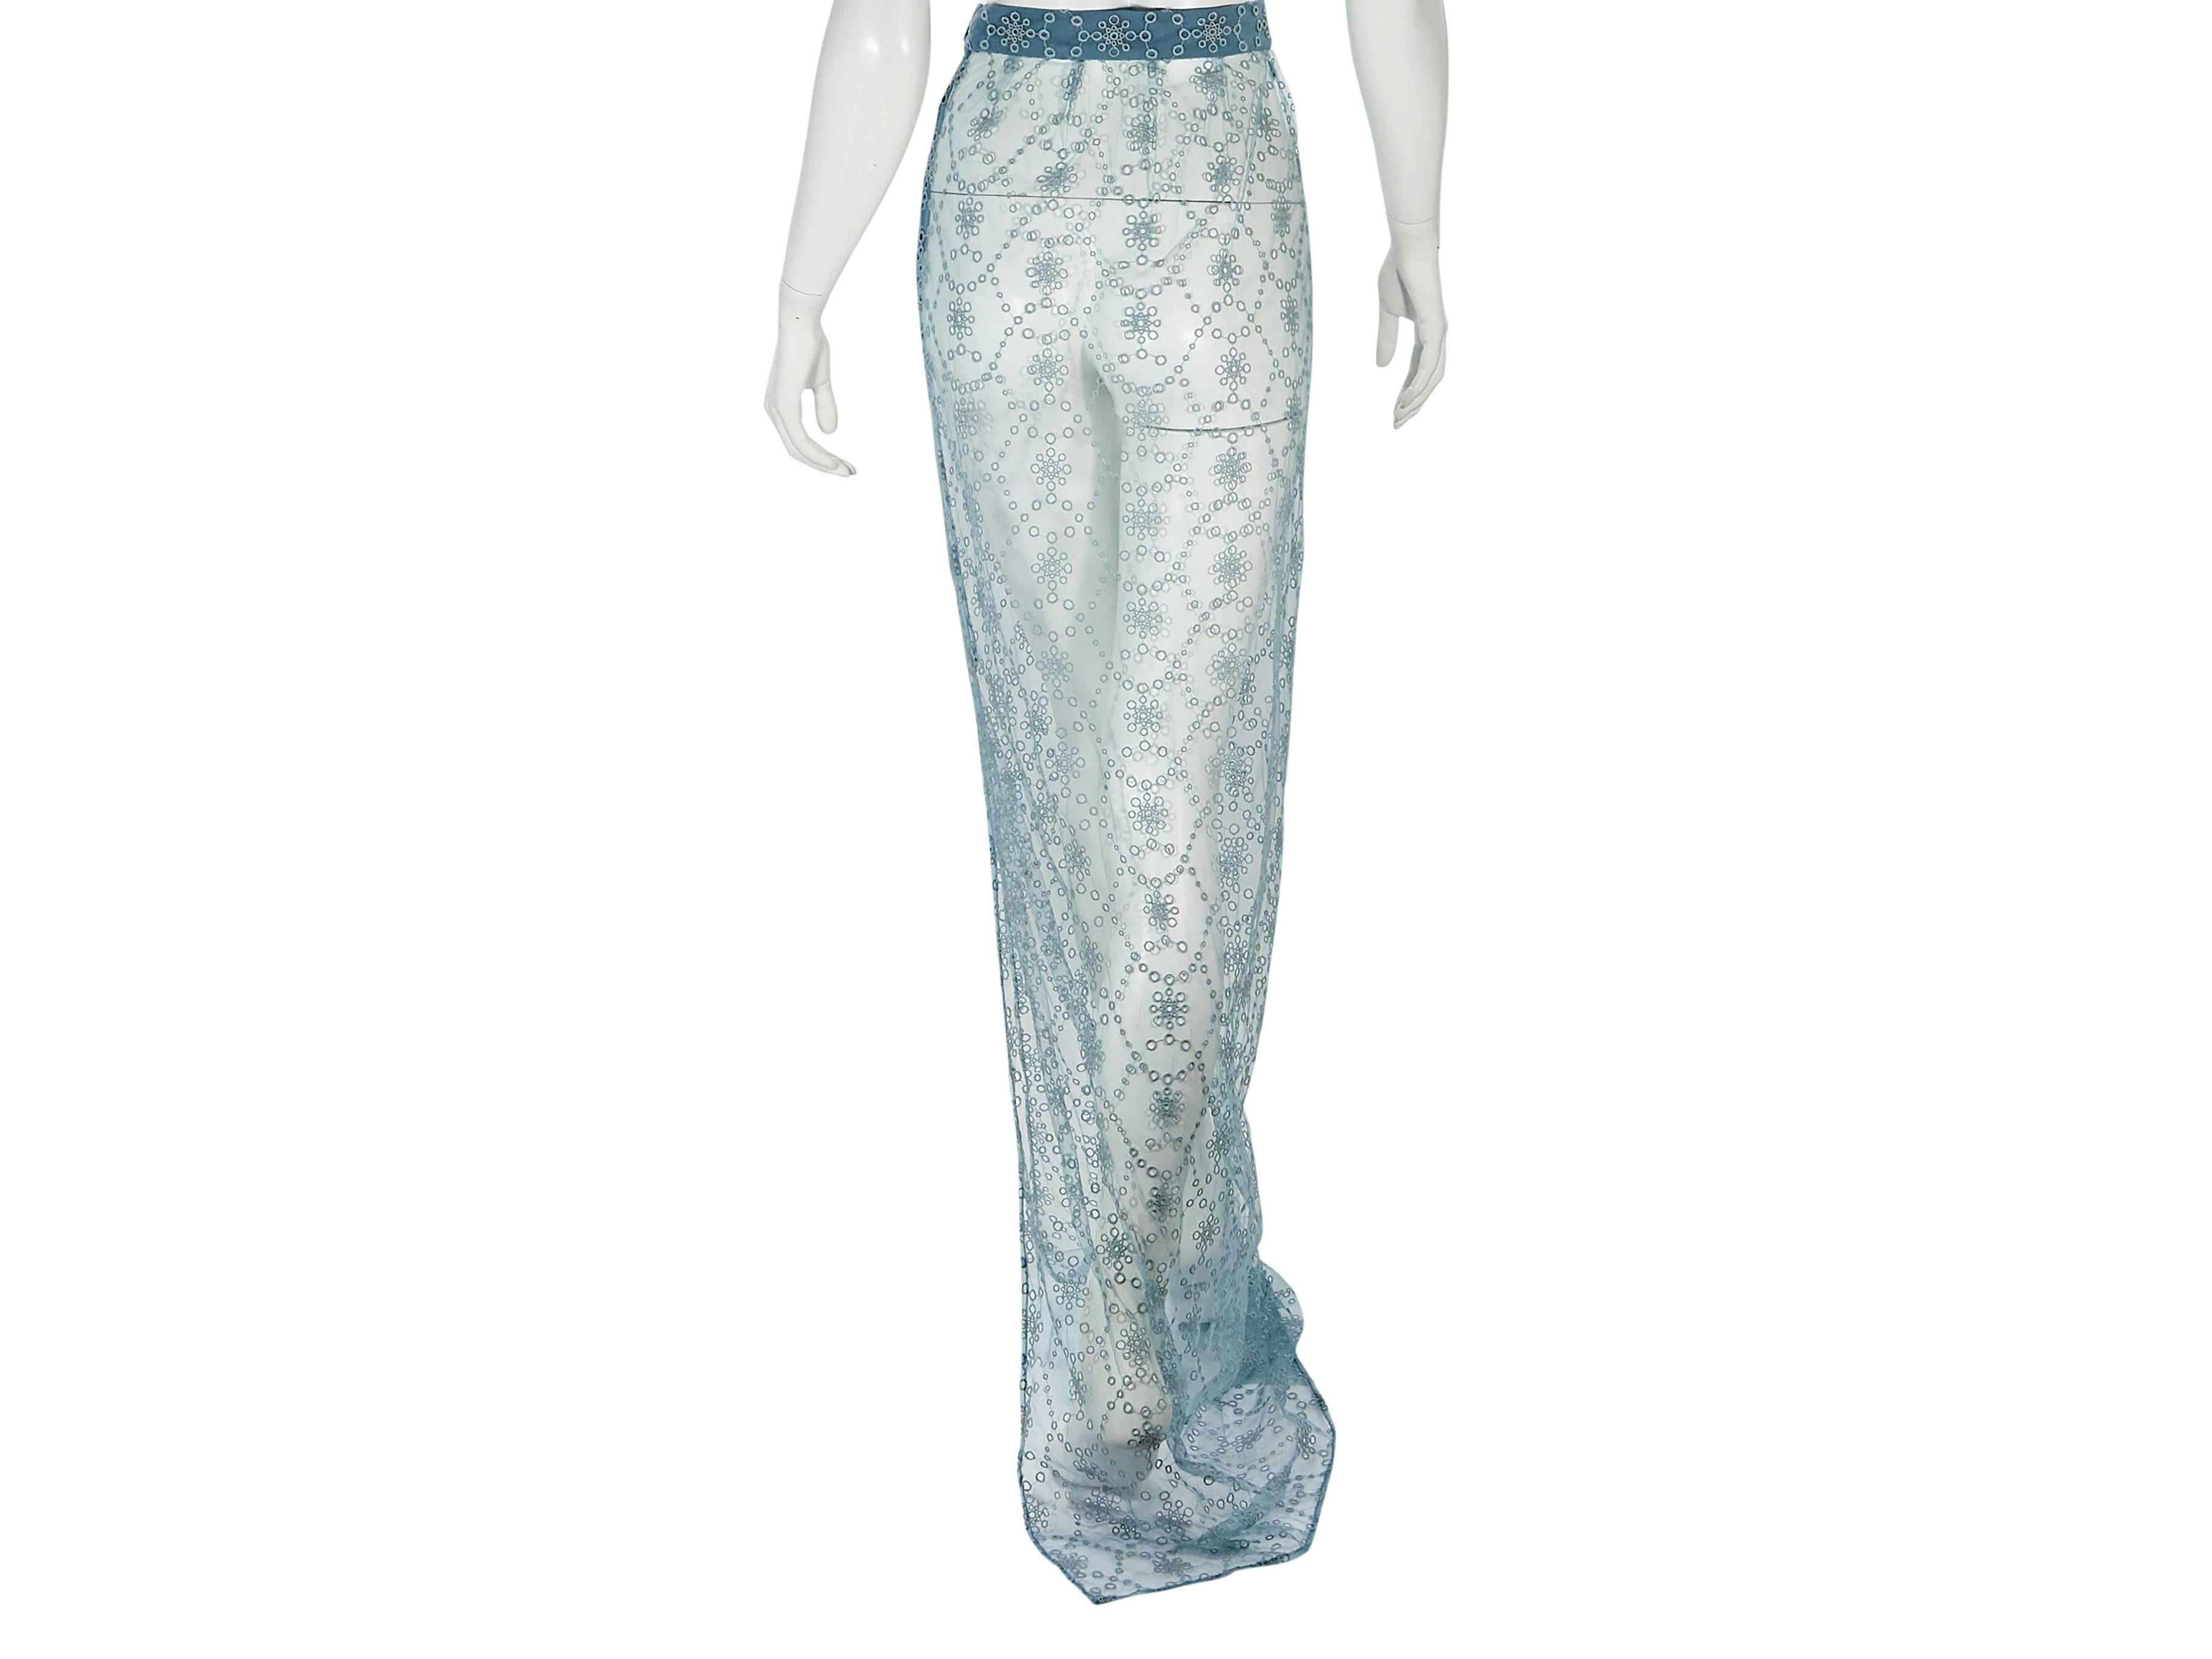 Product details:  Teal sheer eyelet maxi skirt by Burberry Prorsum.  Banded waist.  Concealed side zip closure.  High side slit. 
Condition: Very good. 
Est. Retail $ 1,225.00